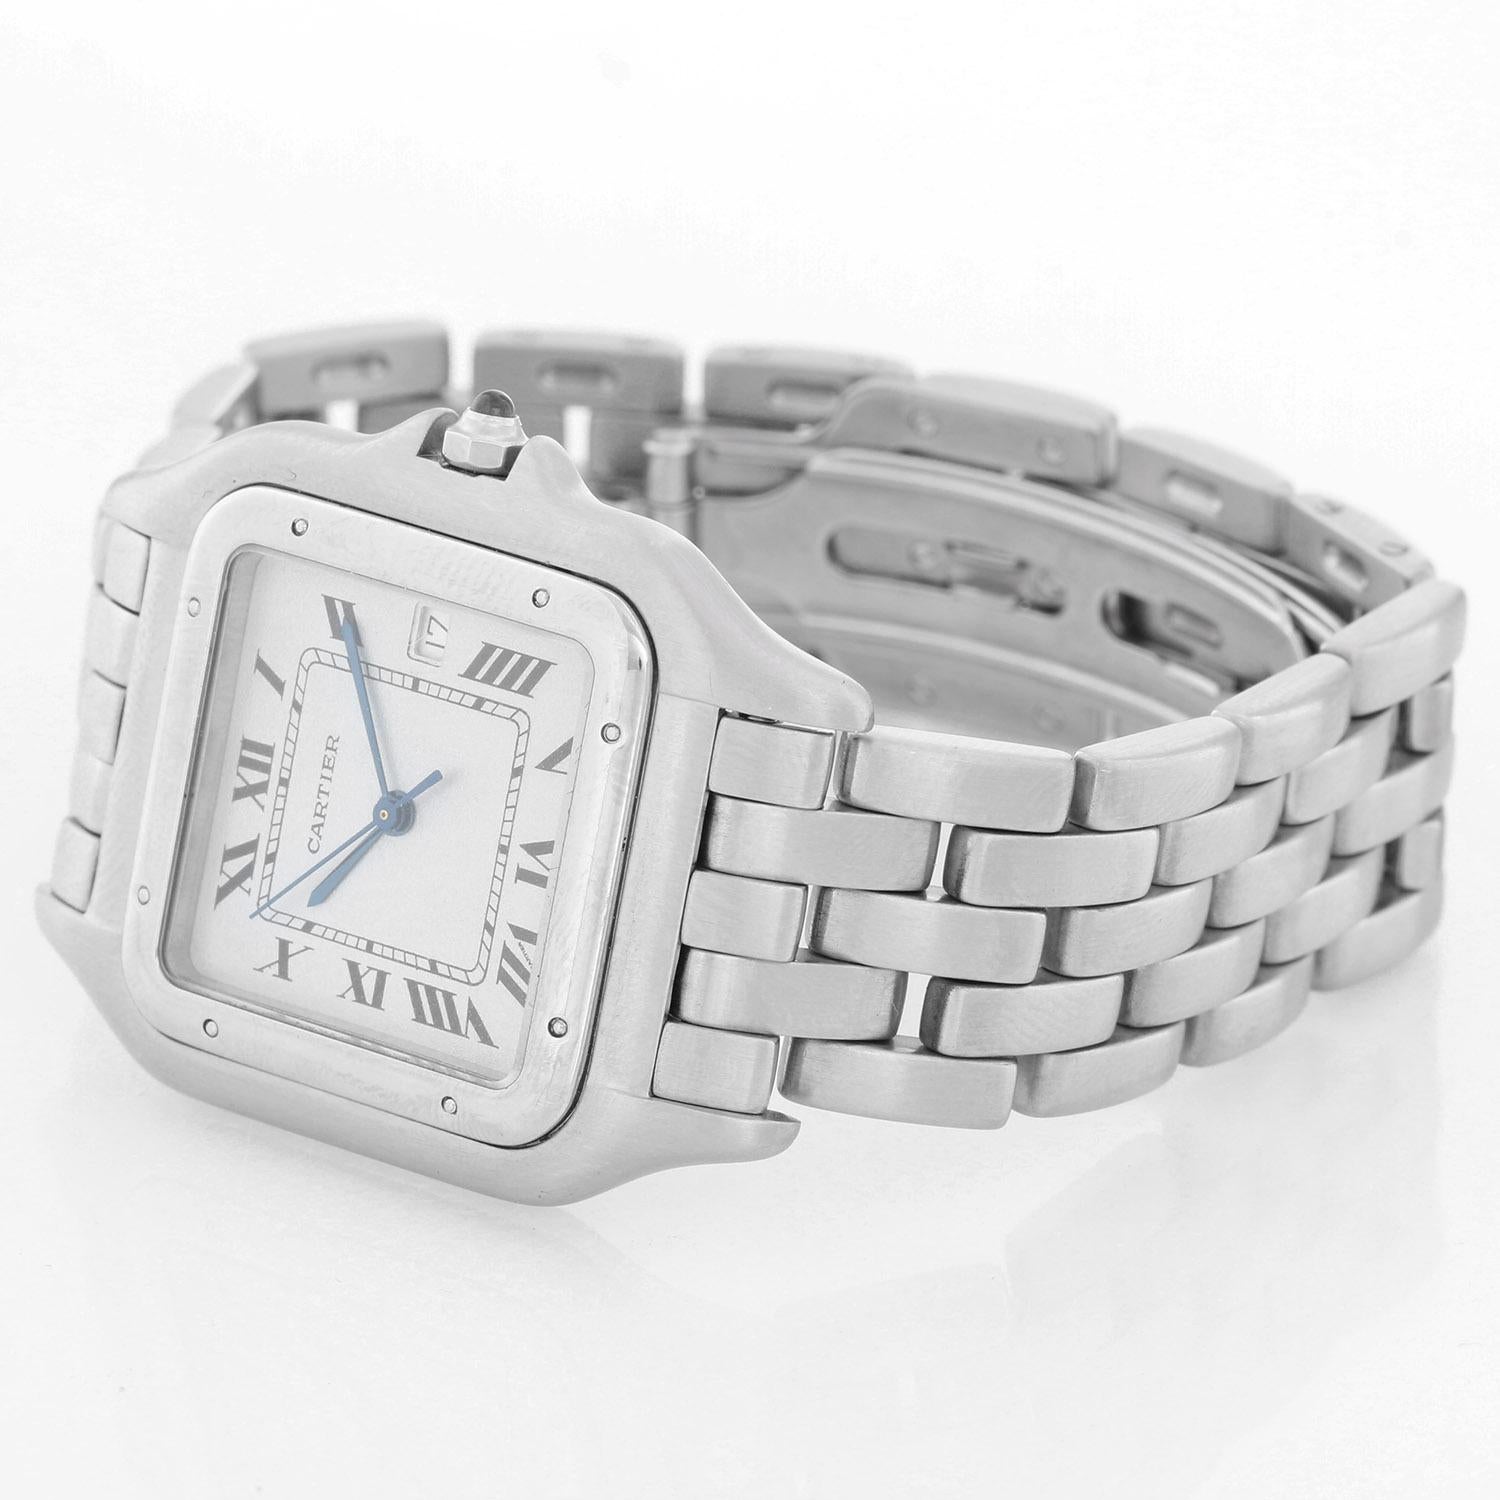 Cartier Panther Stainless Steel Men's Quartz Watch with Date 1